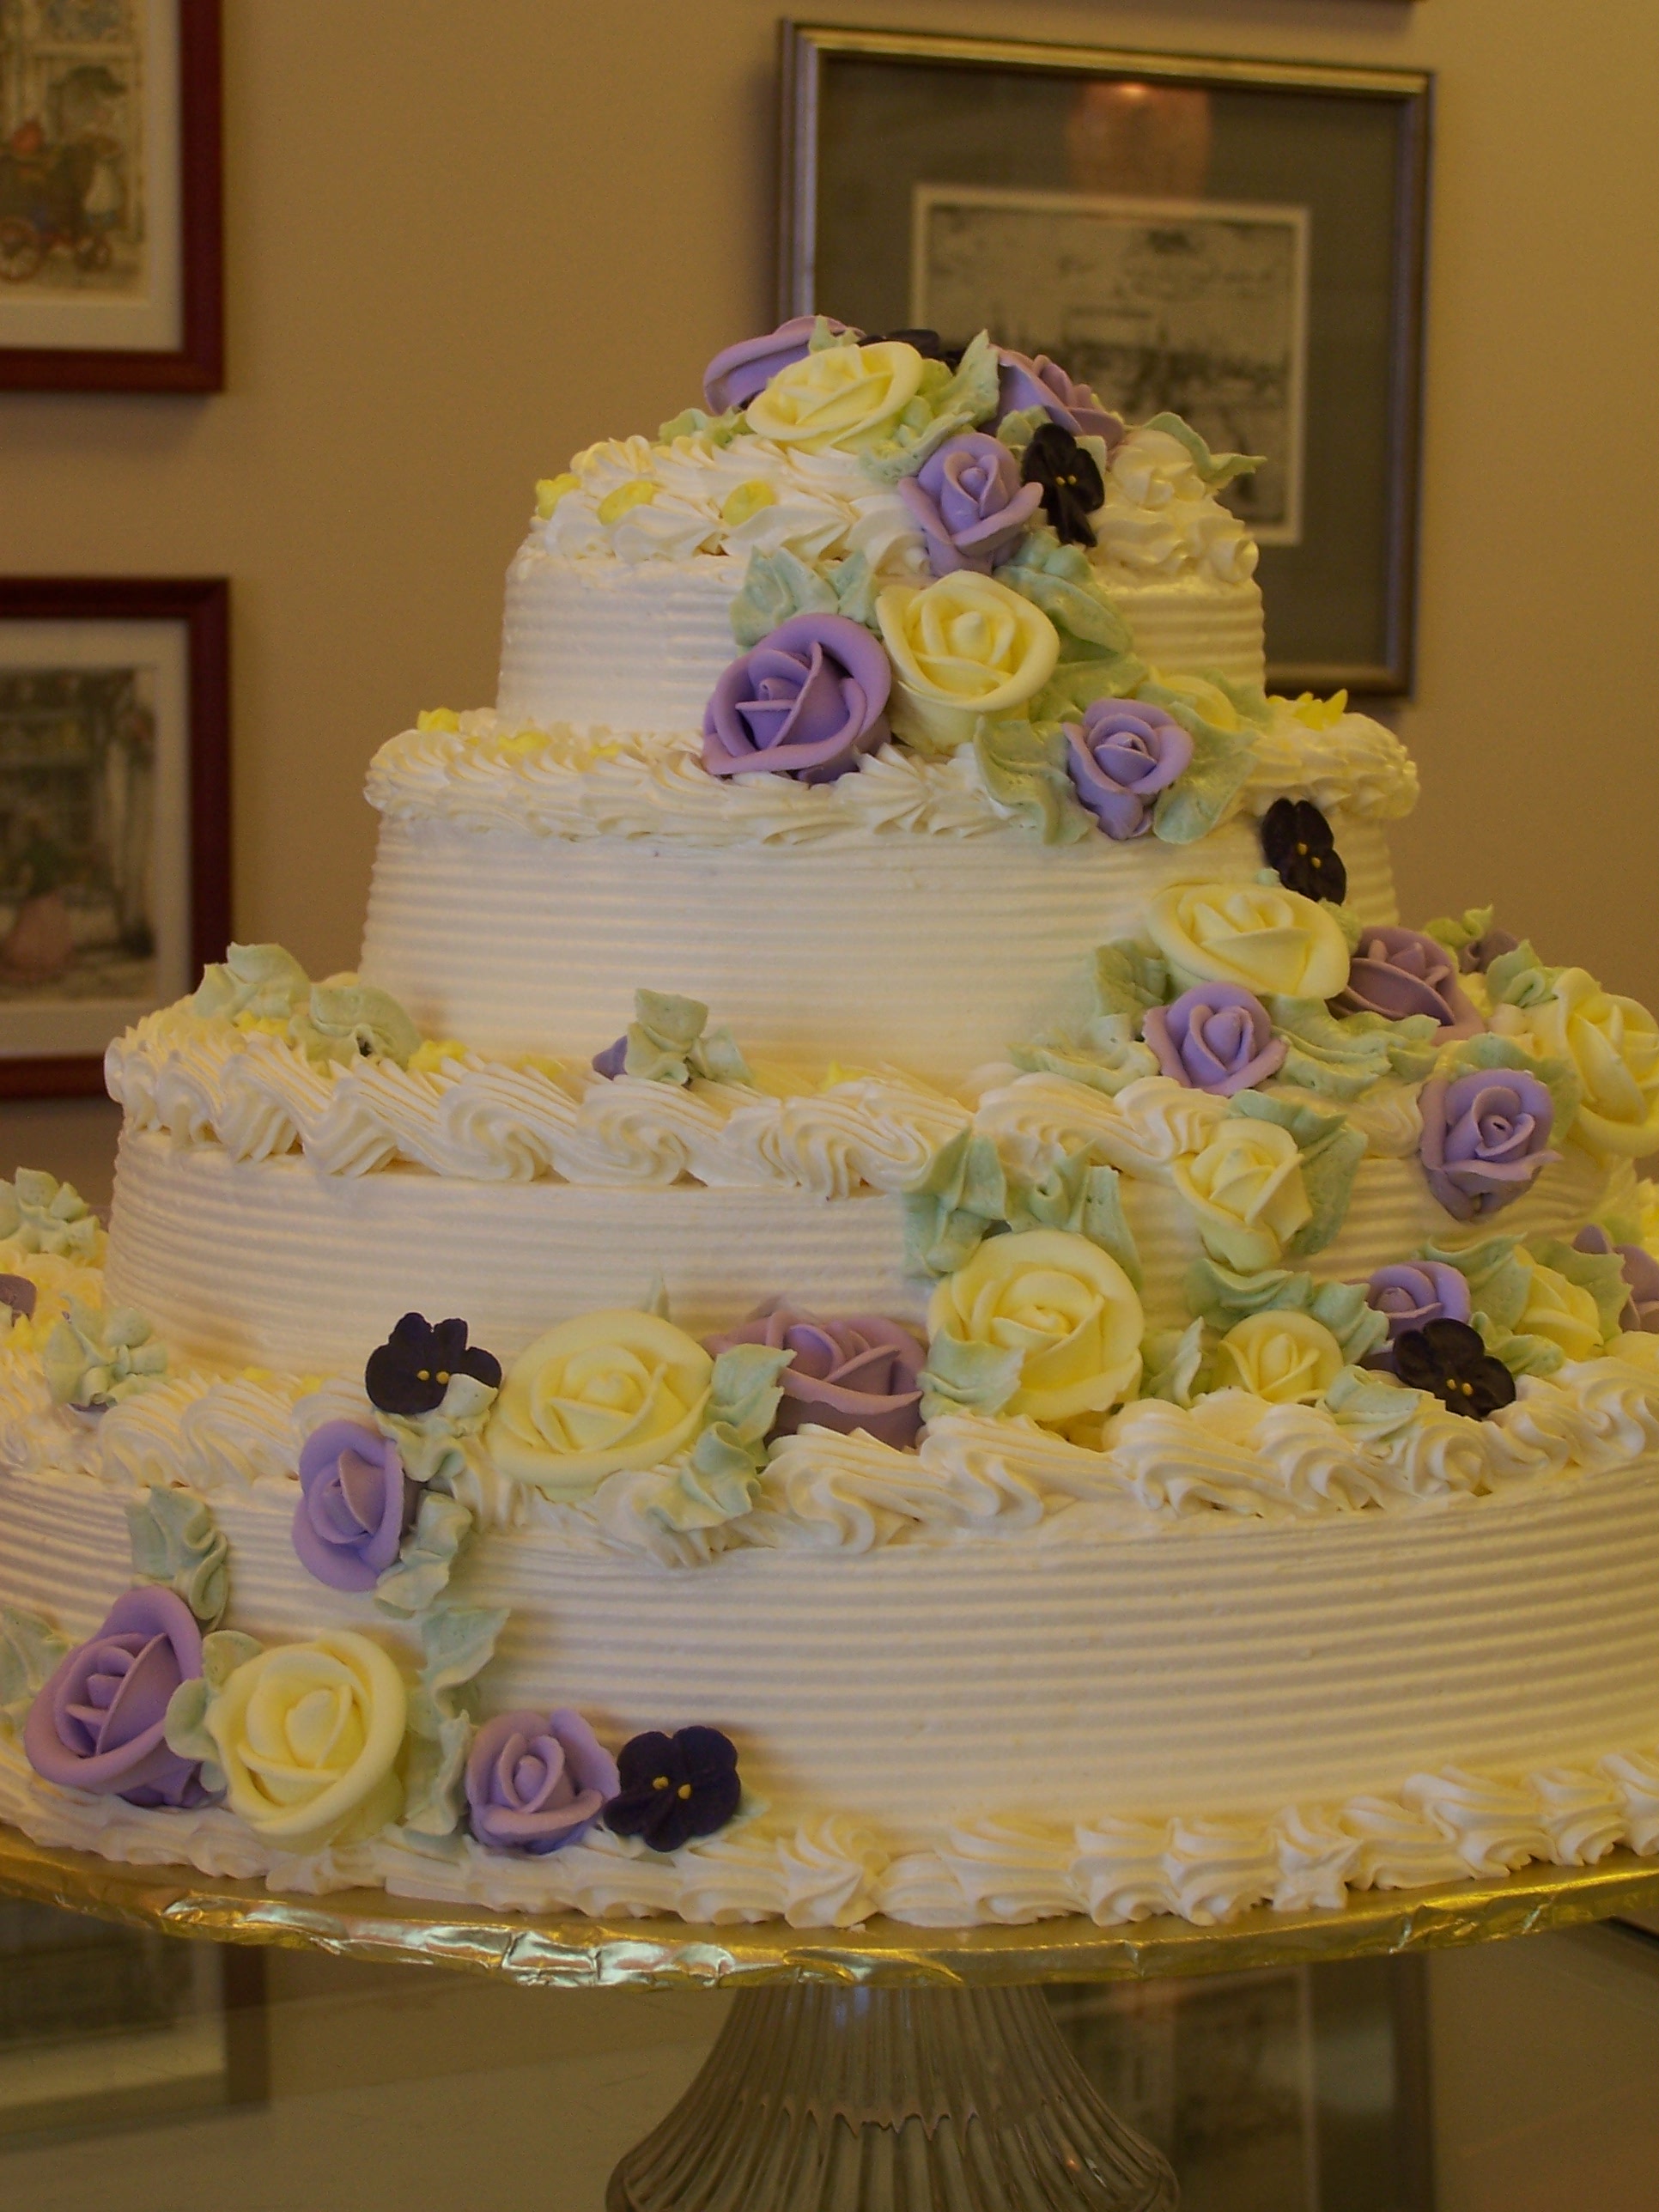 Pictures of large wedding cakes